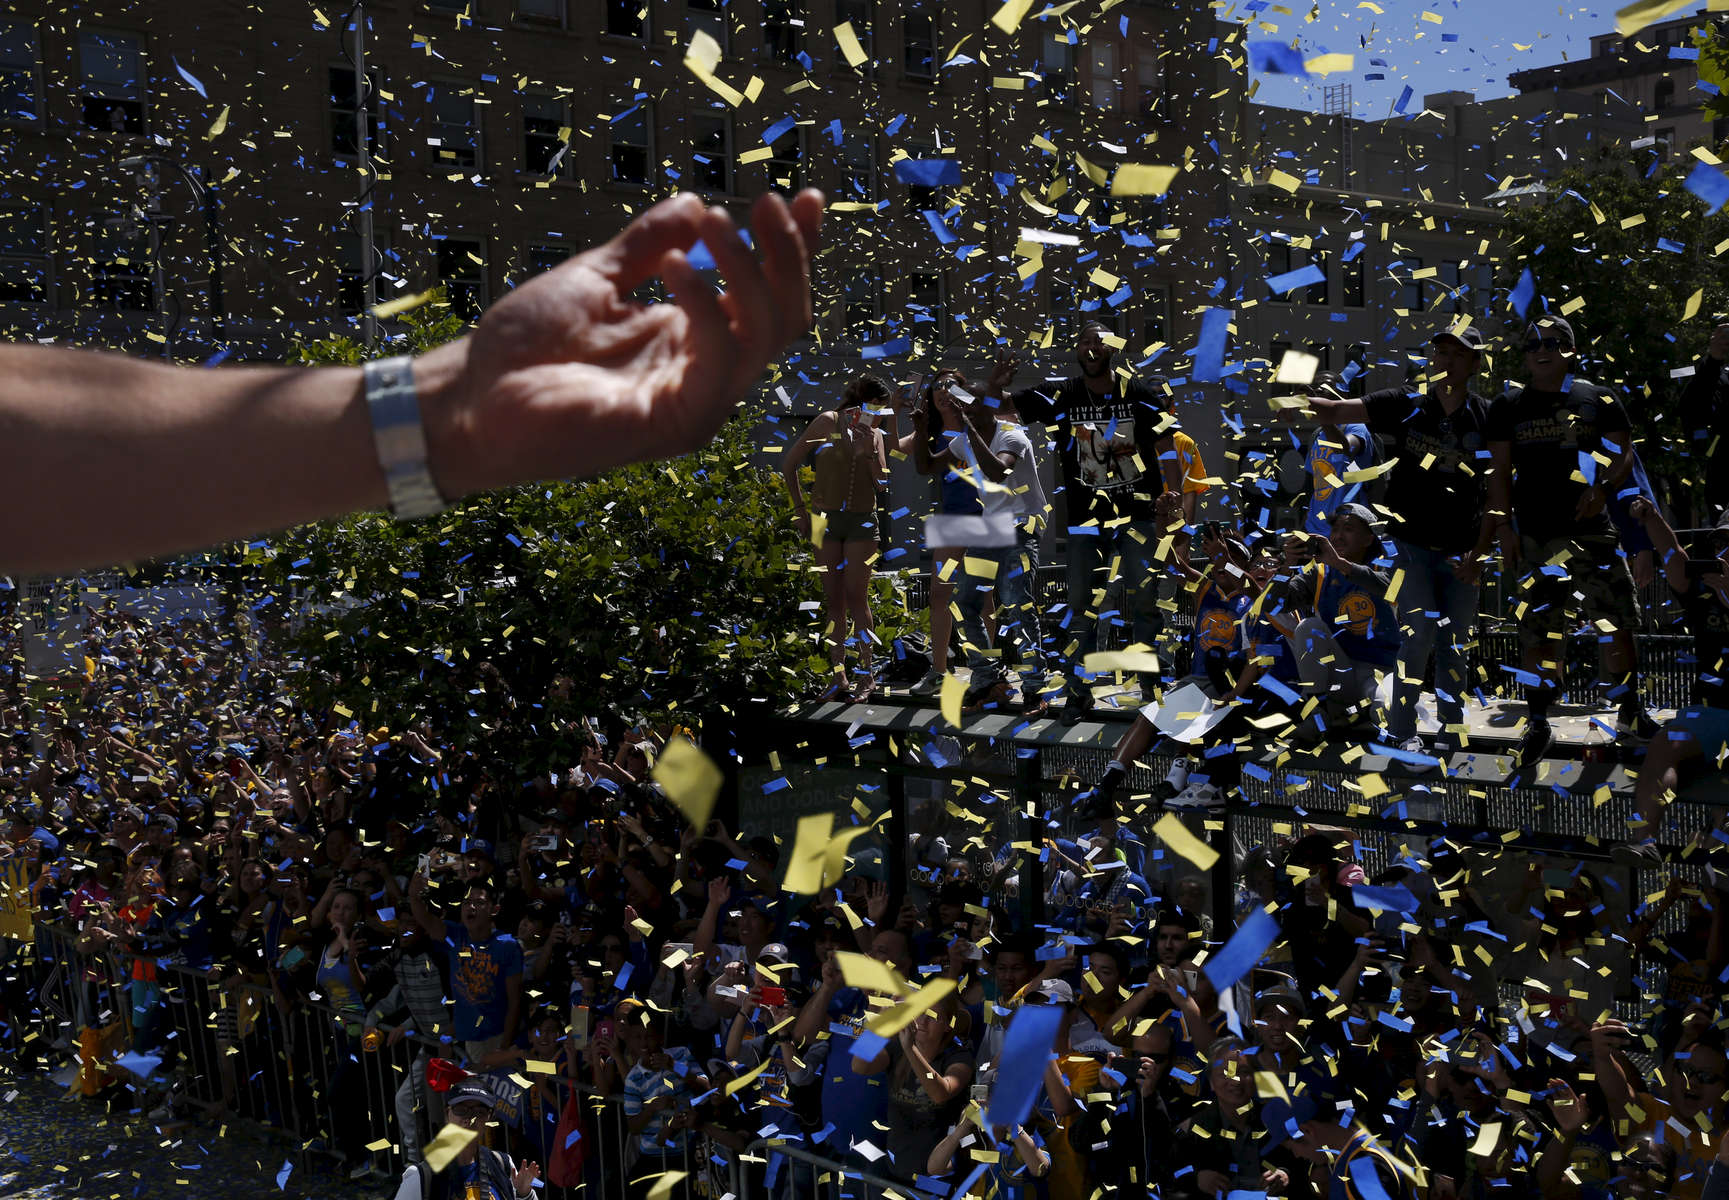 JaVale McGee takes in the scene as thousands of fans cheer during the Warriors' 2017 NBA Championship parade June 15, 2017 in Oakland, Calif.